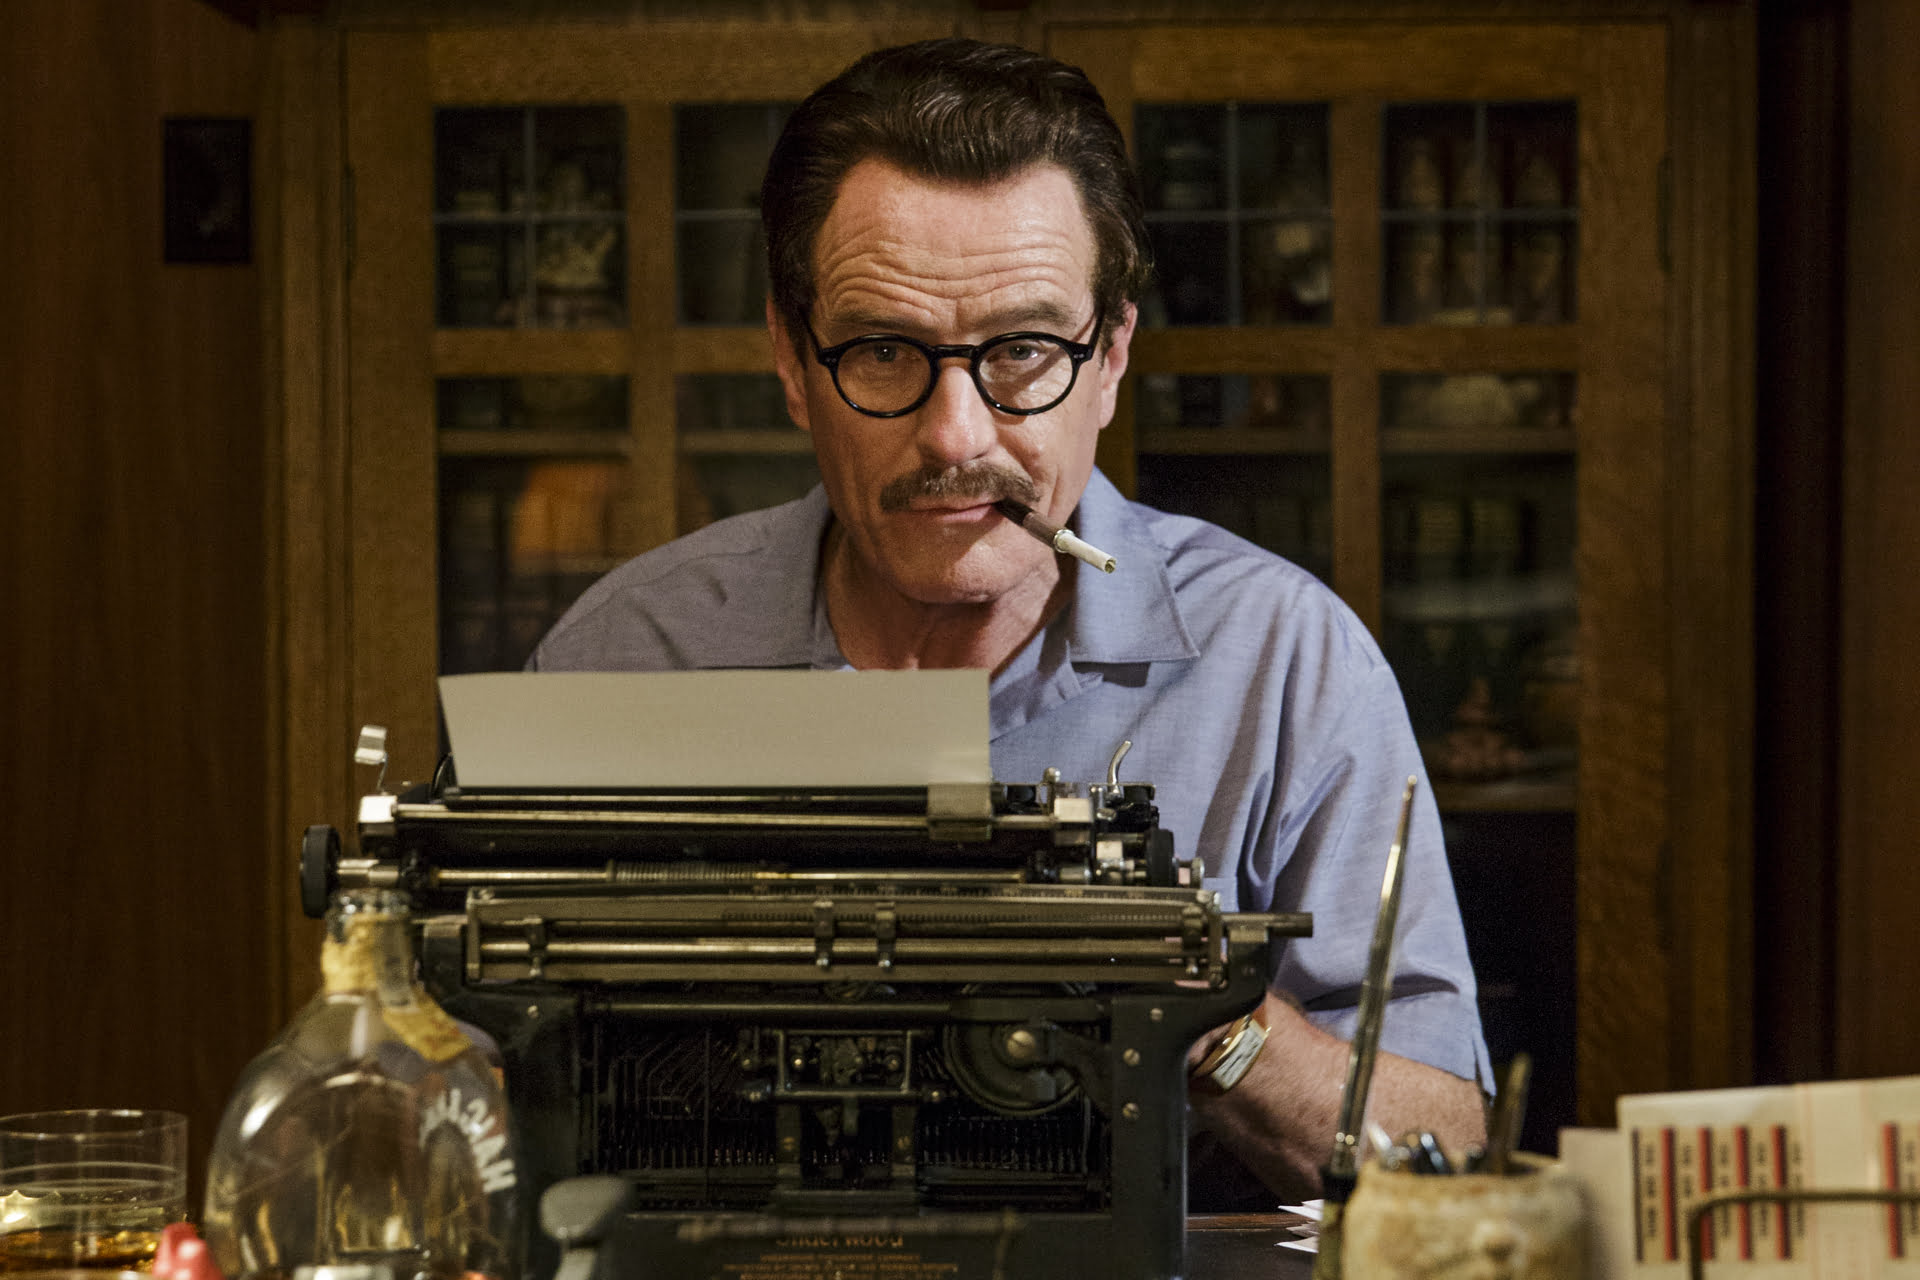 TRUMBO-First-Look-Image